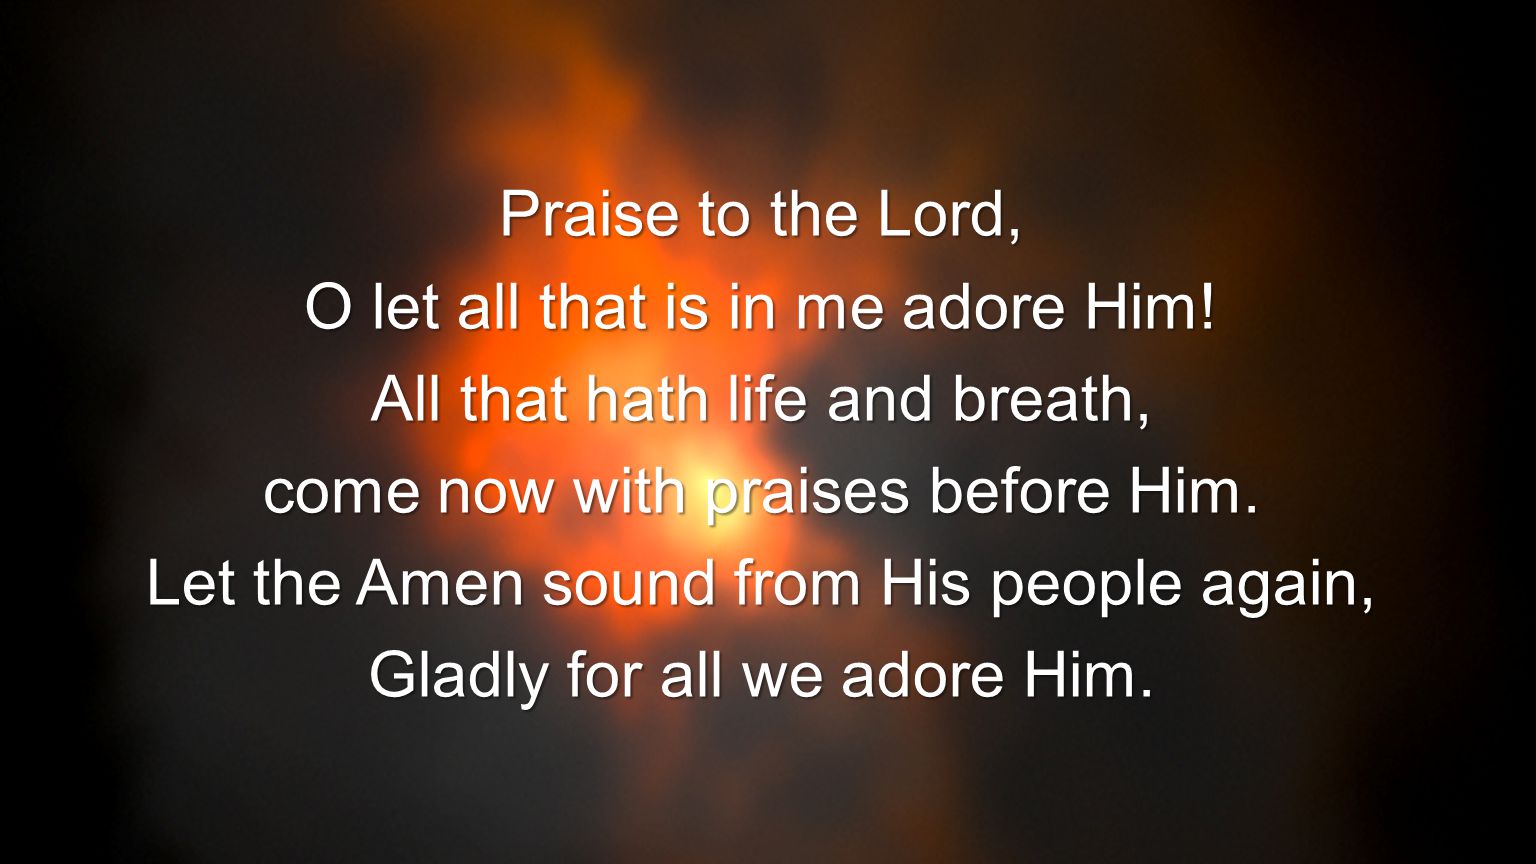 O let all that is in me adore Him! All that hath life and breath,